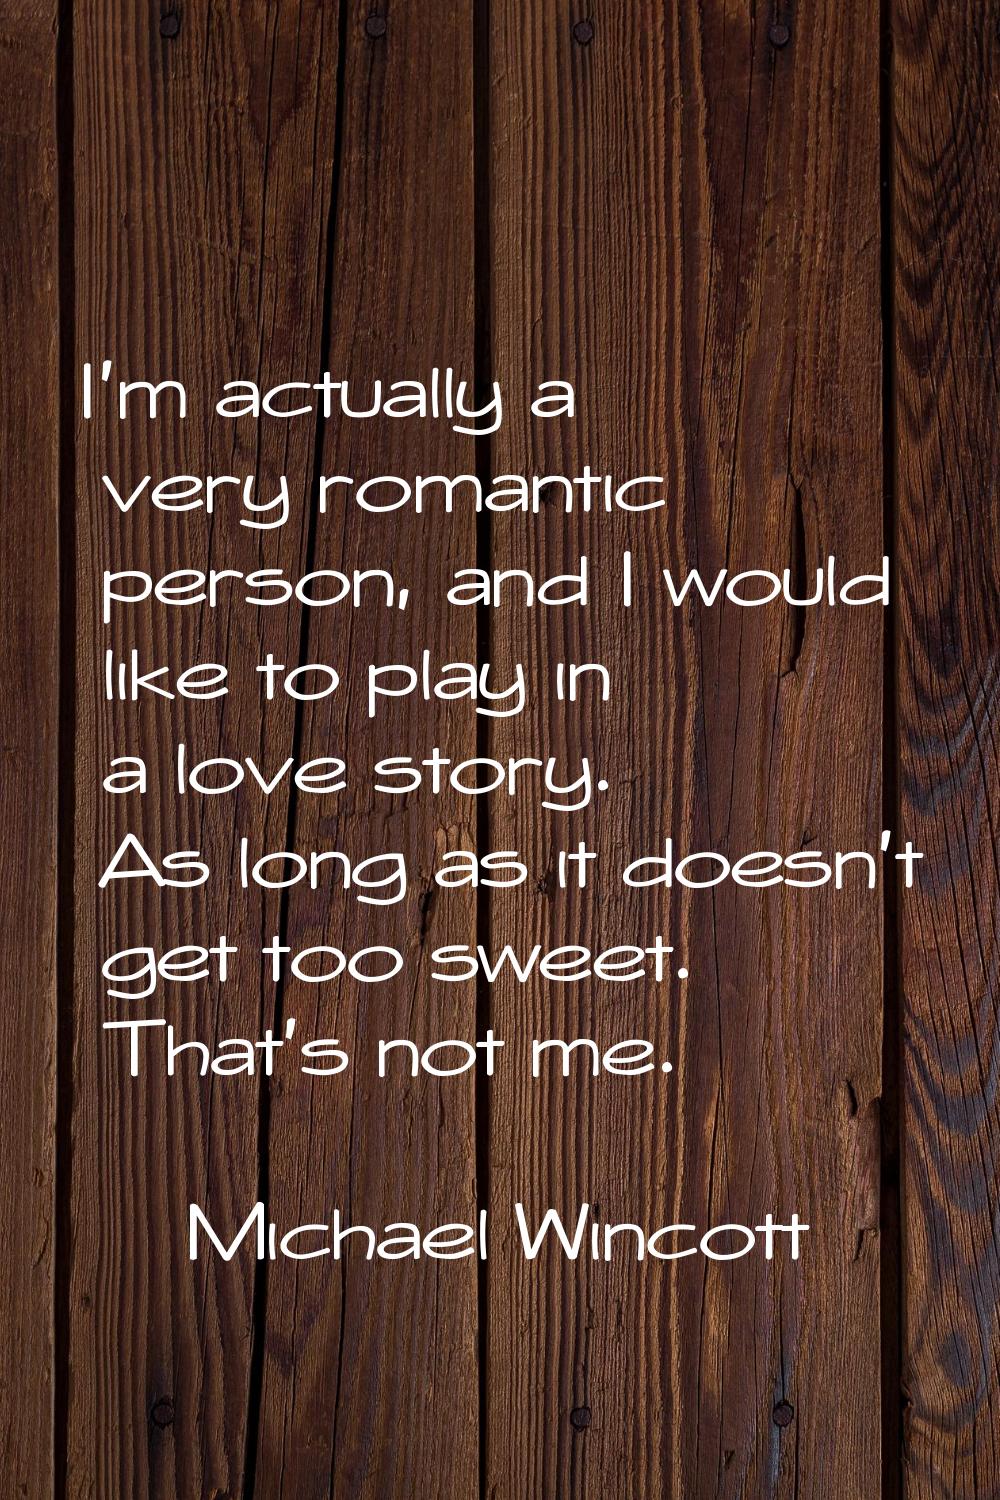 I'm actually a very romantic person, and I would like to play in a love story. As long as it doesn'